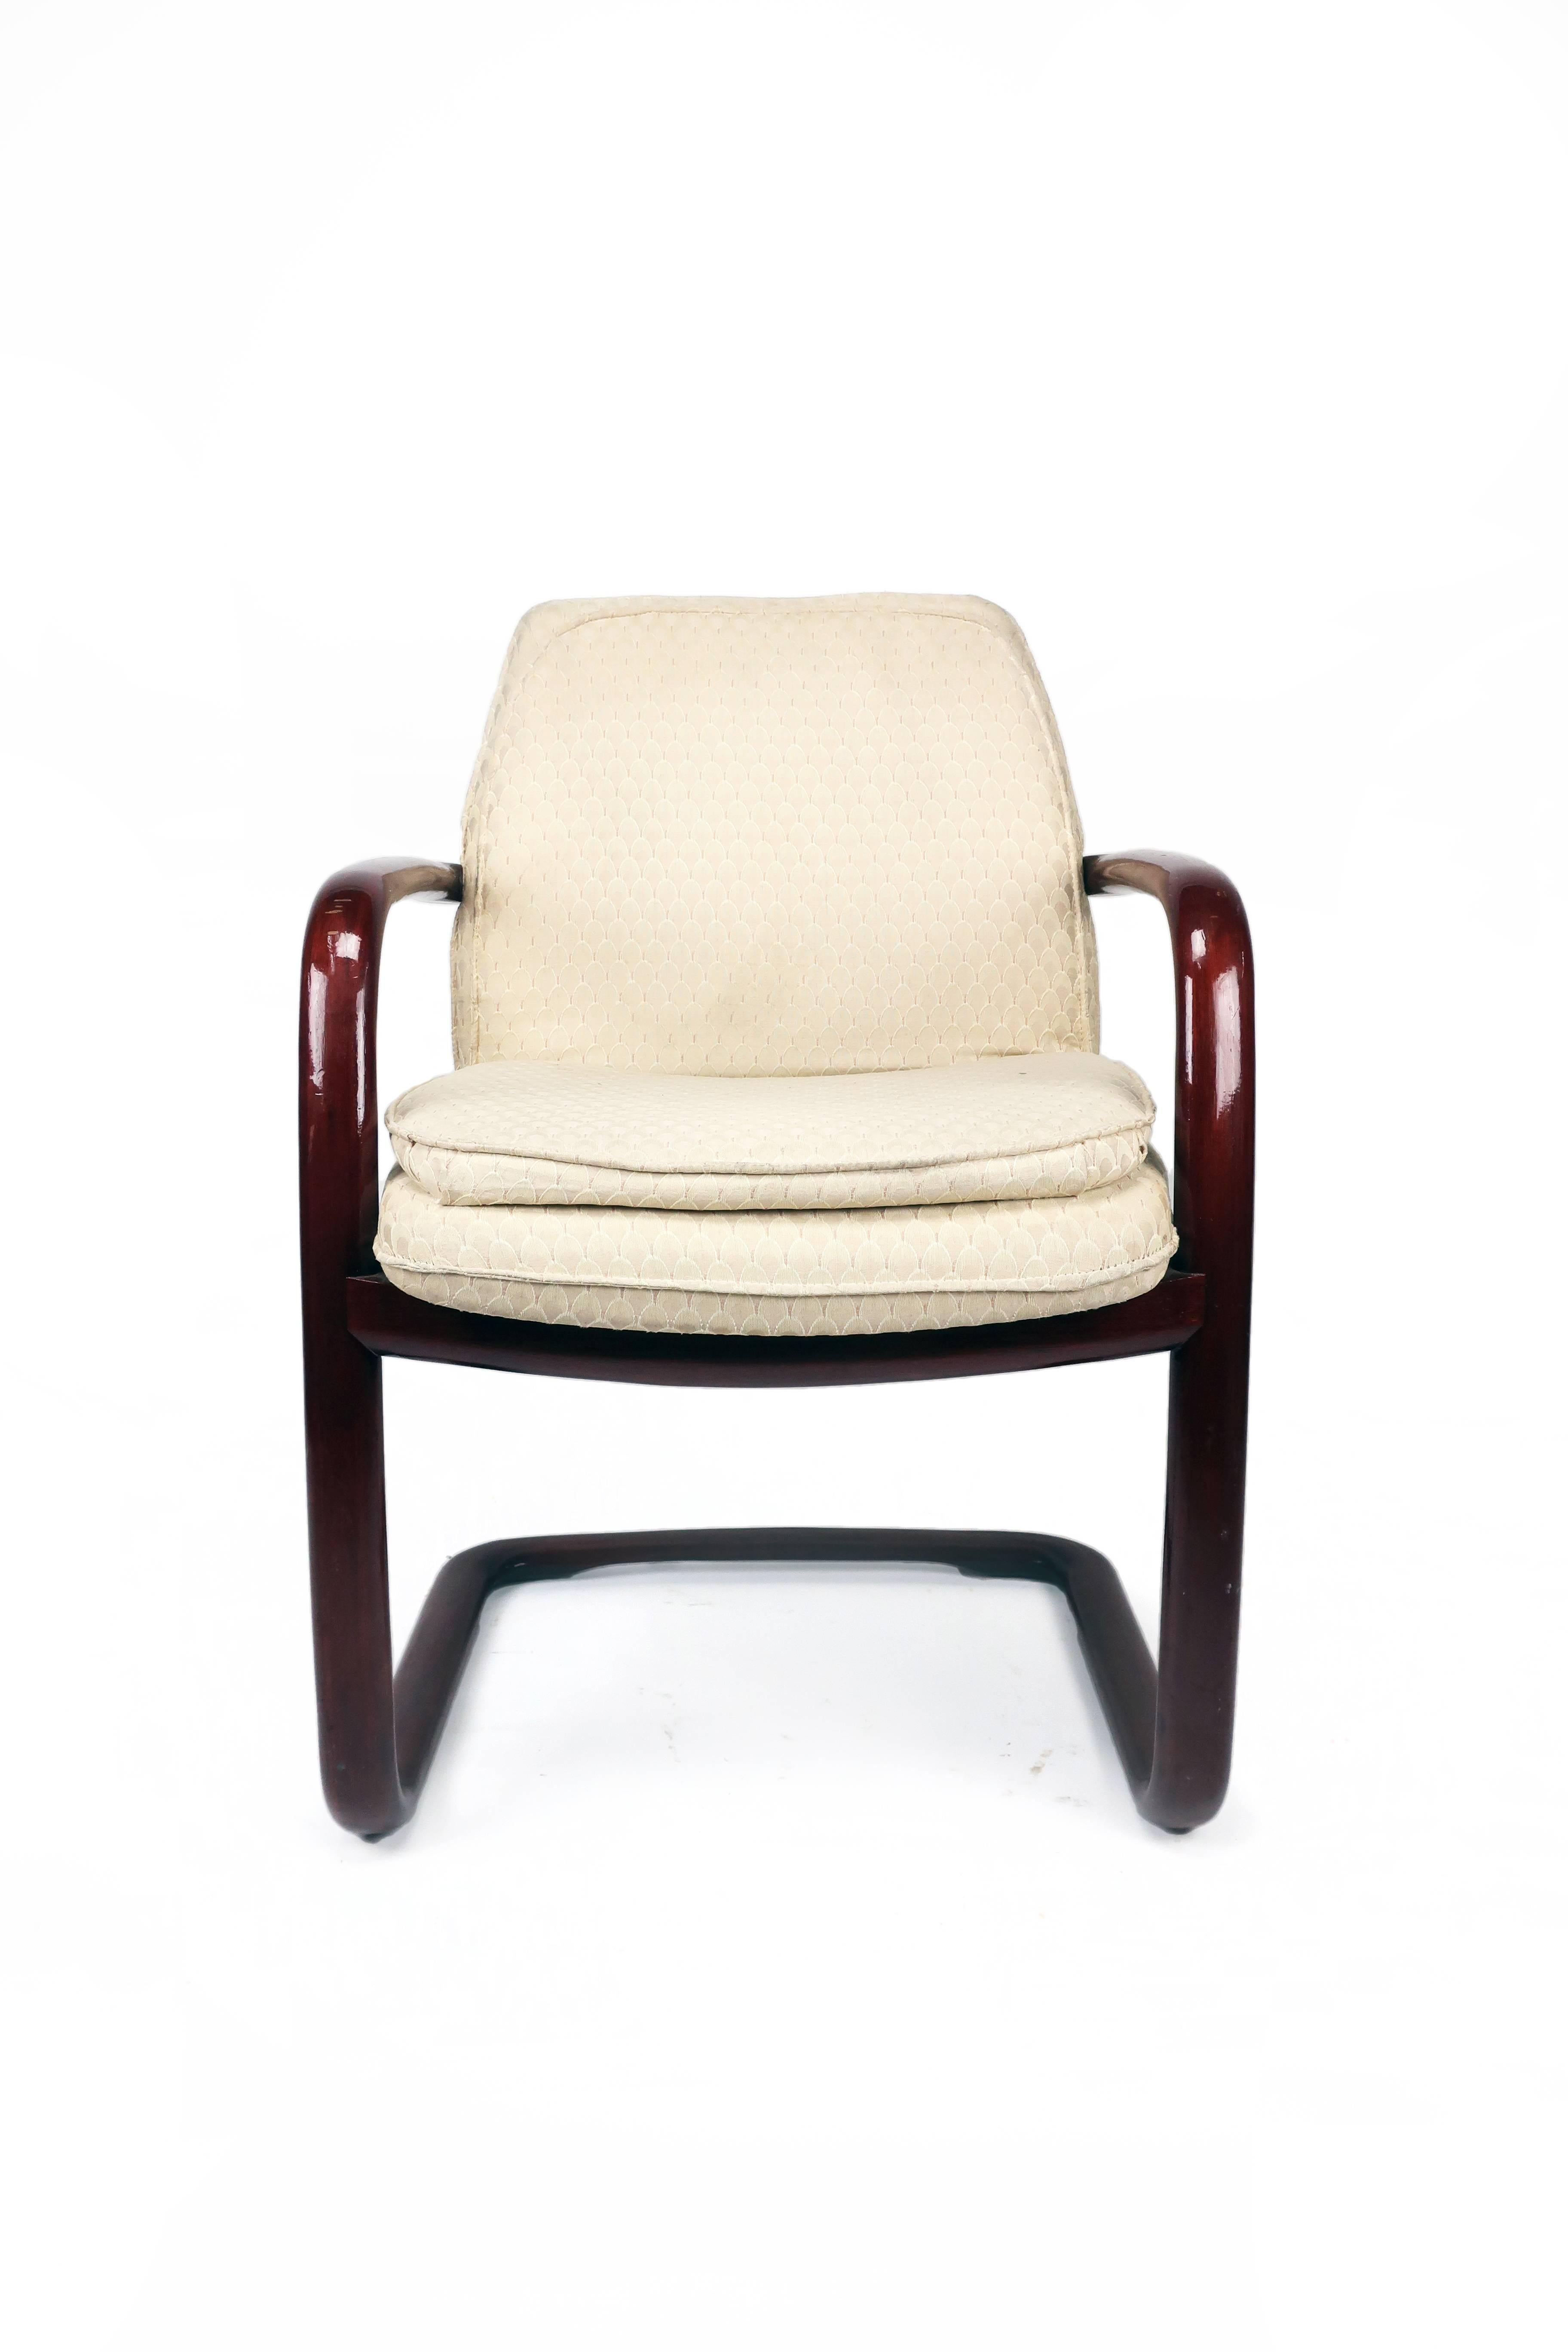 From the 1980s, this set of four vintage Gunlocke armchairs have a rich reddish wood frame and cream upholstered seats with an Art Deco inspired patter. The cantilever design is comfortable and visually striking.

Inset metal Gunlocke mark appears